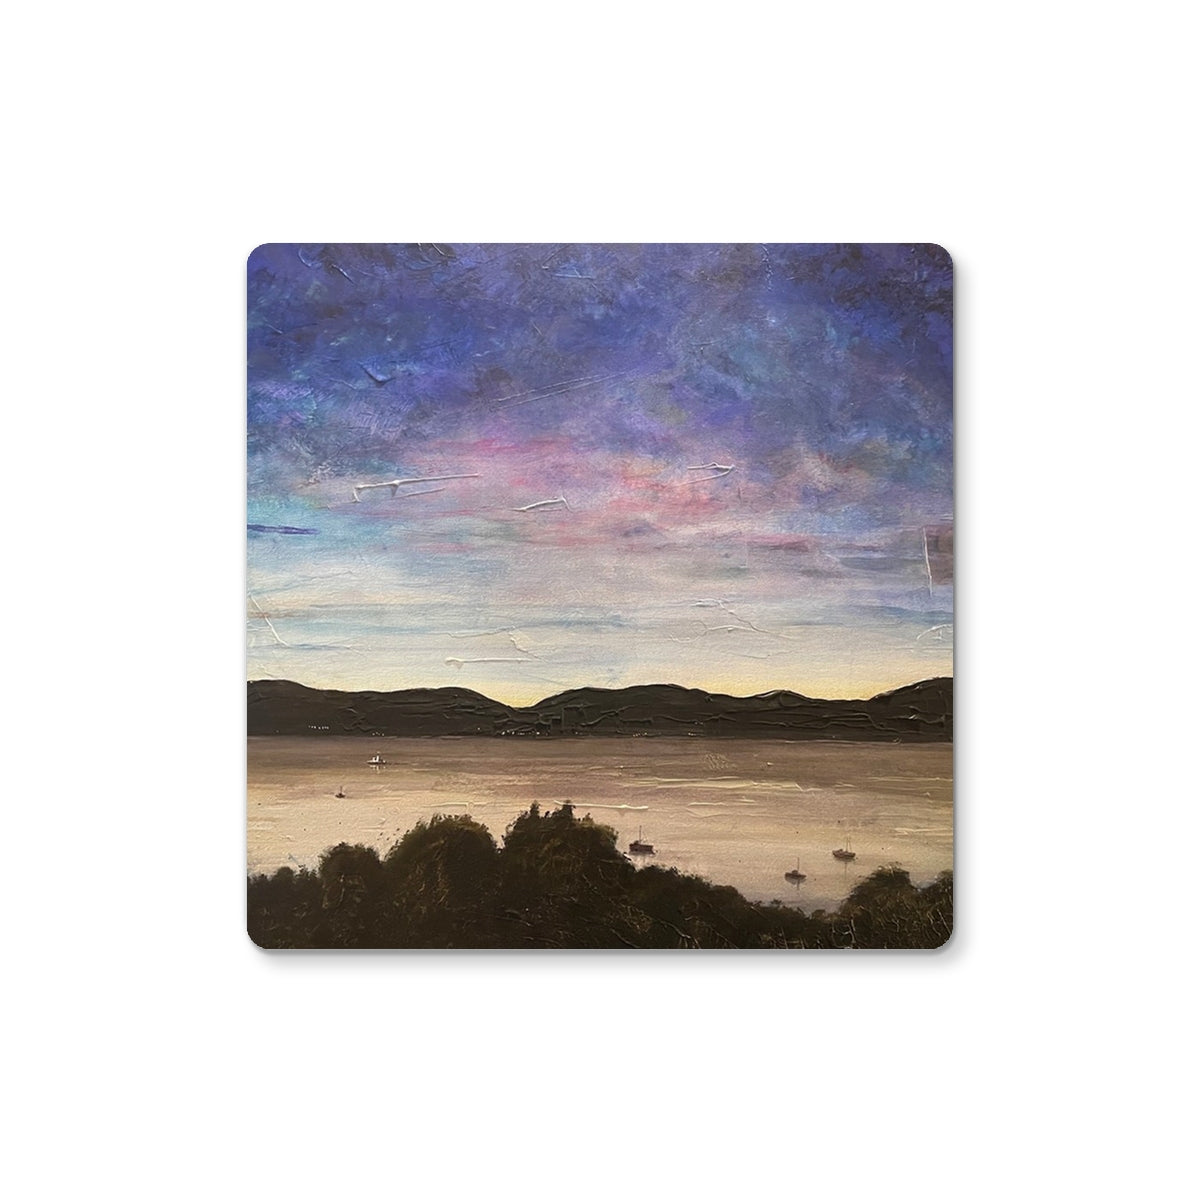 River Clyde Twilight Art Gifts Coaster-Homeware-River Clyde Art Gallery-Single Coaster-Paintings, Prints, Homeware, Art Gifts From Scotland By Scottish Artist Kevin Hunter